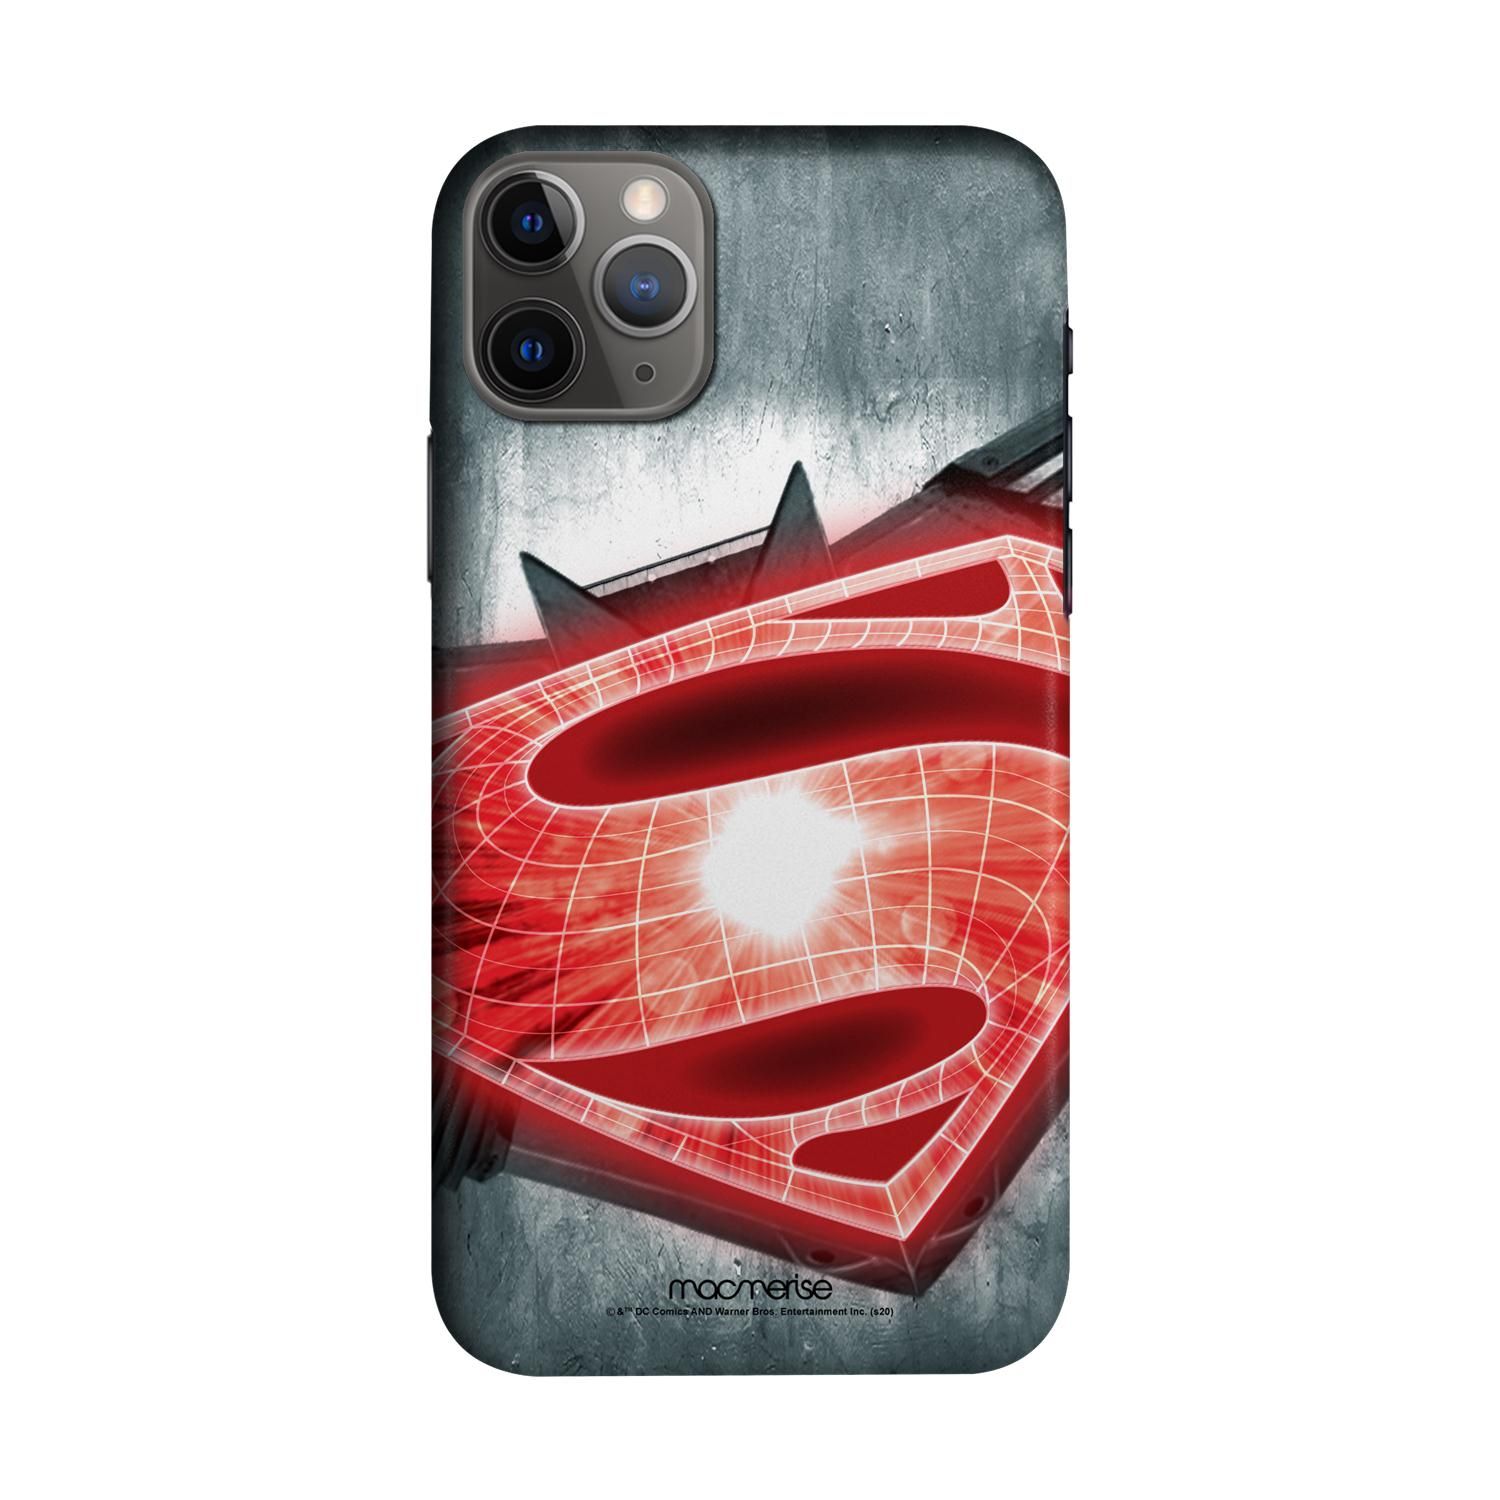 Legends Will Collide - Sleek Phone Case for iPhone 11 Pro Max